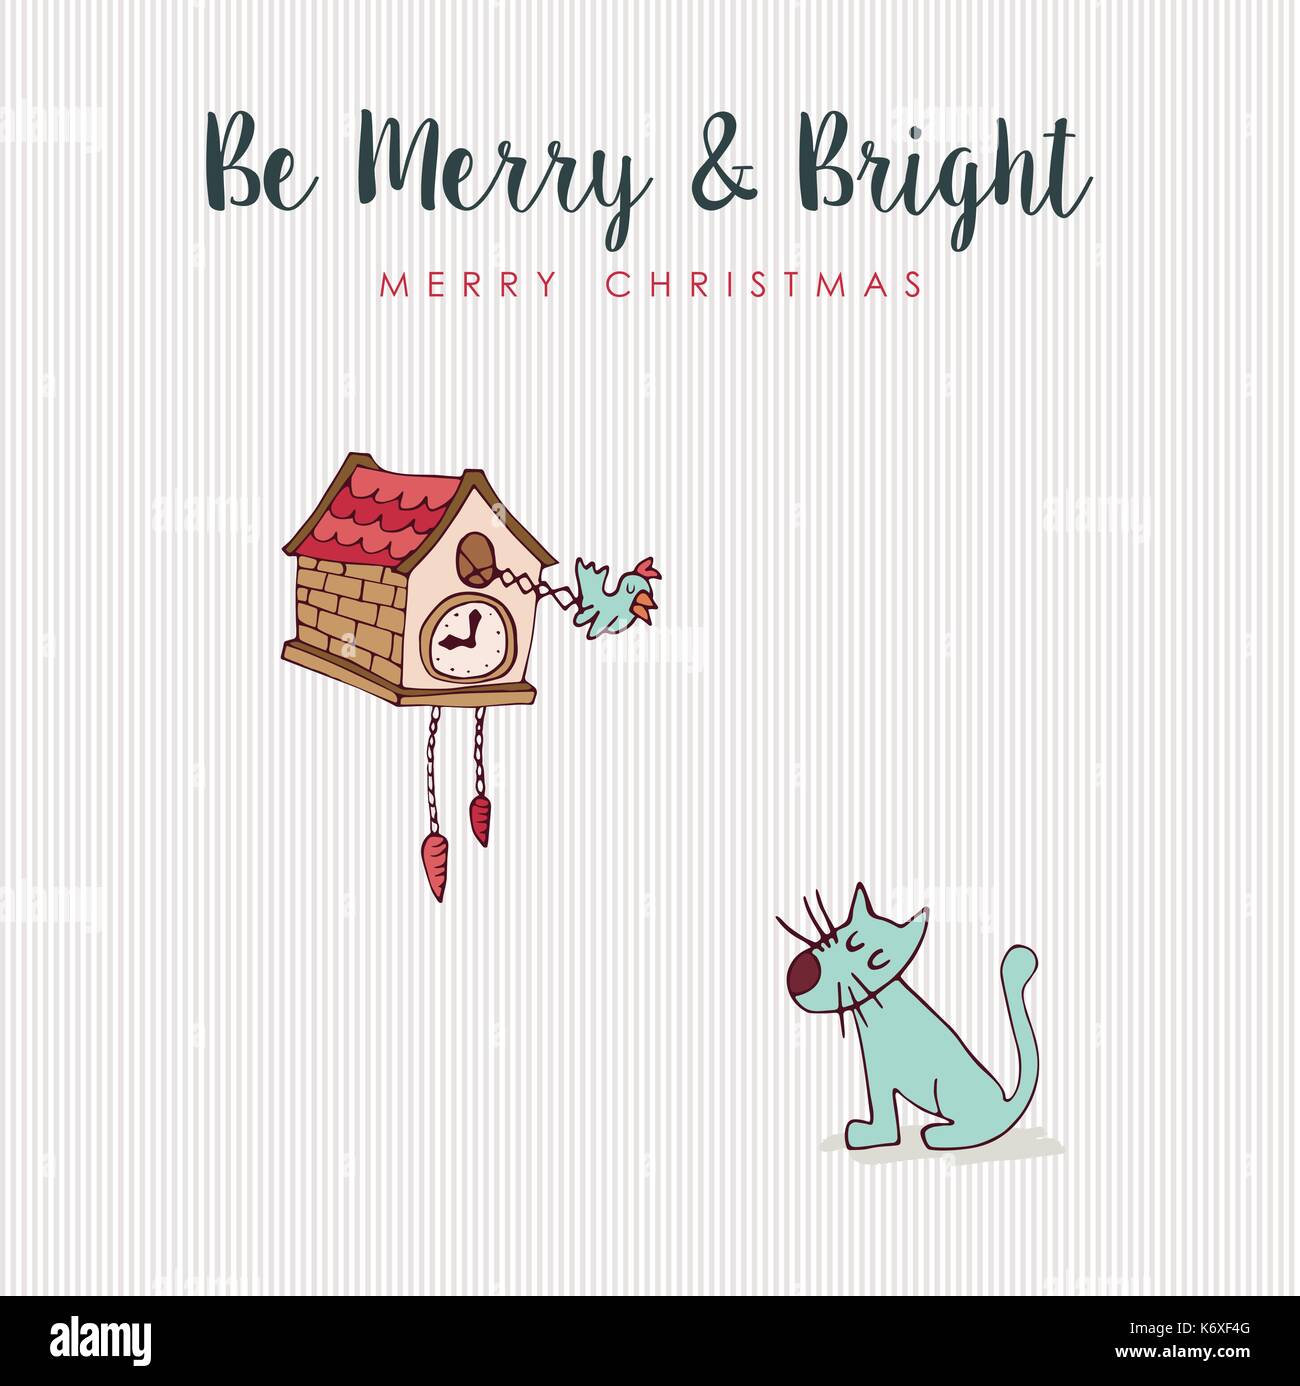 Merry Christmas hand drawn animal greeting card. Funny cat and cuckoo bird clock cartoon with holiday typography quote. EPS10 vector. Stock Vector